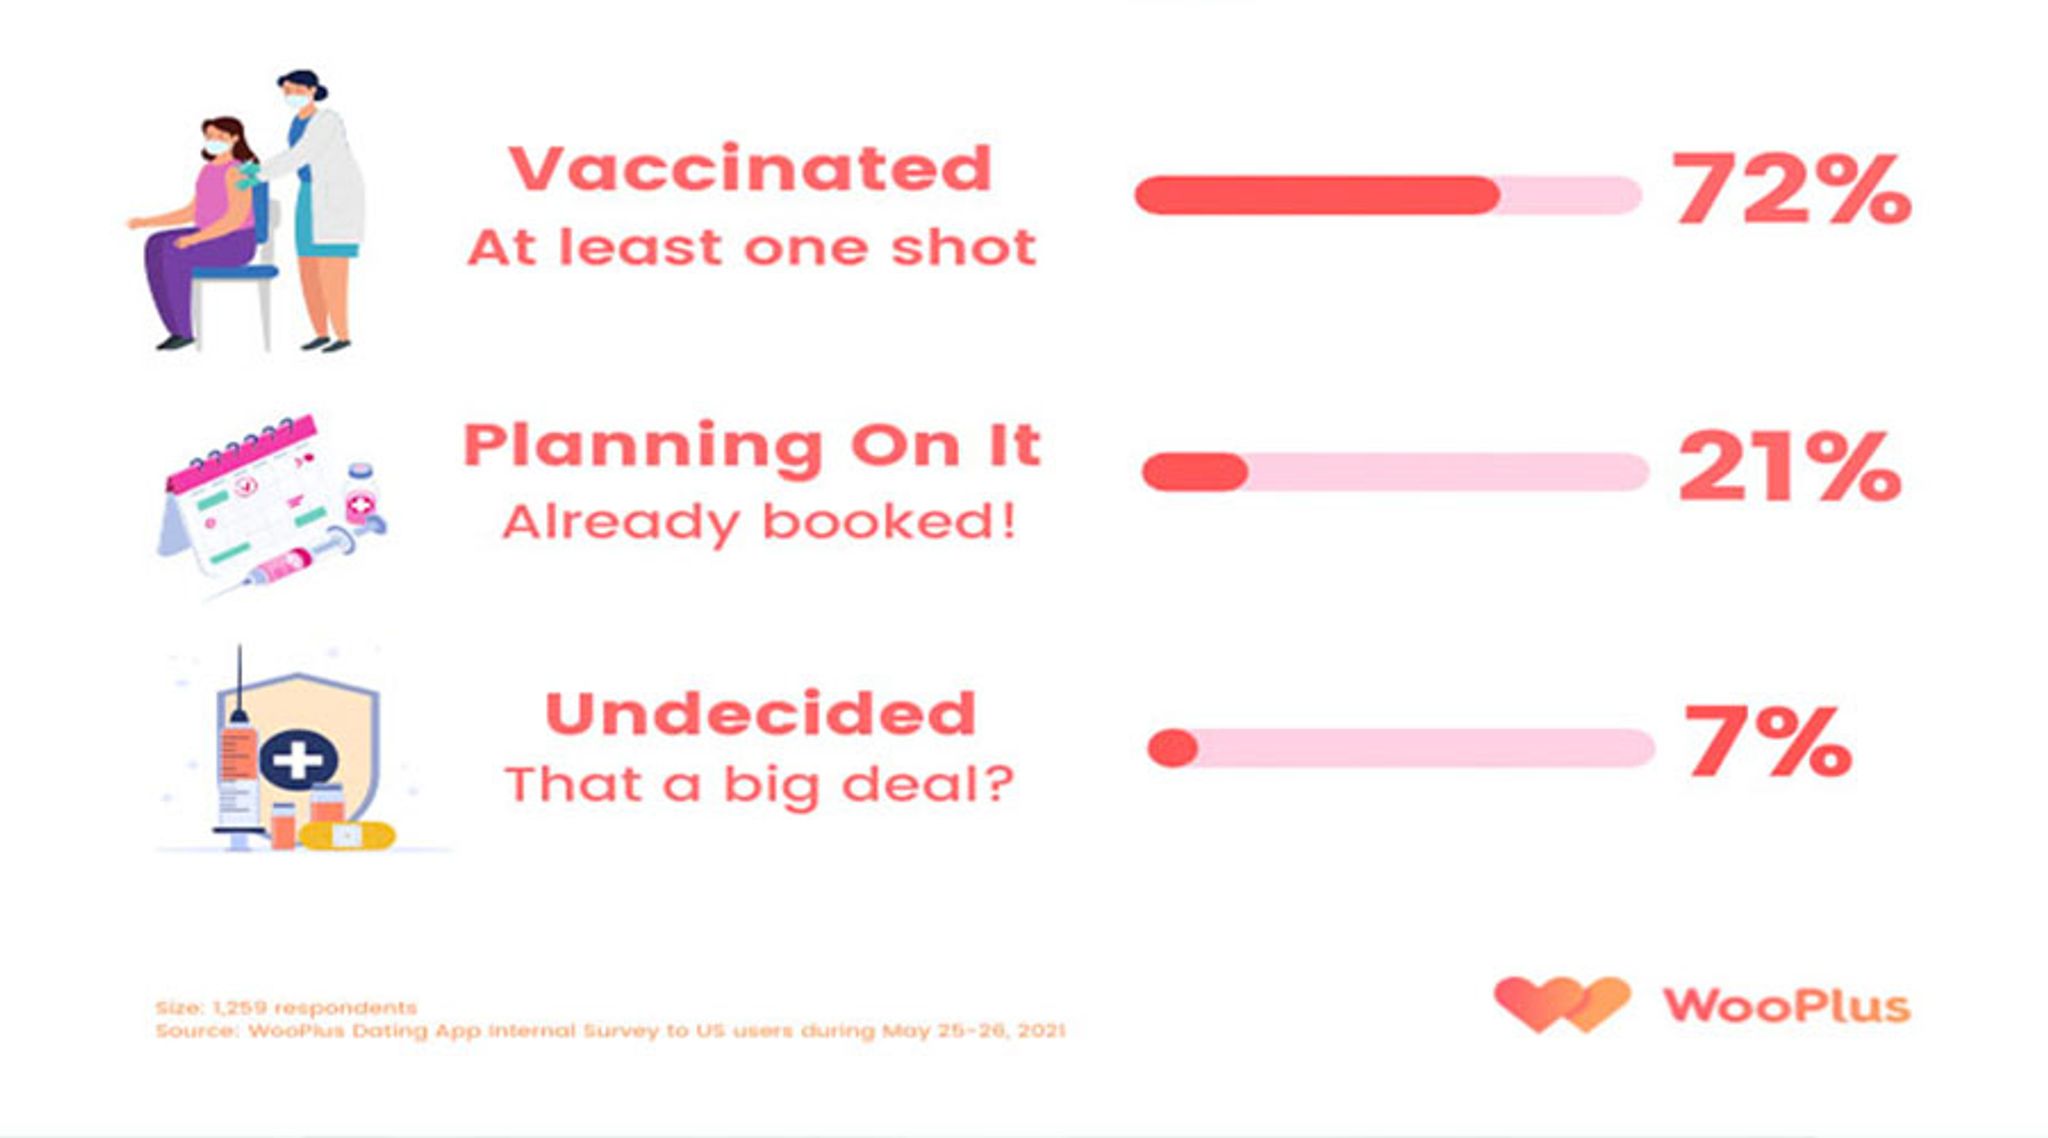 WooPlus, the Largest Dating App for Curvy People, Actively Responds to the President’s Call to Action To Boost COVID-19 Vaccinations